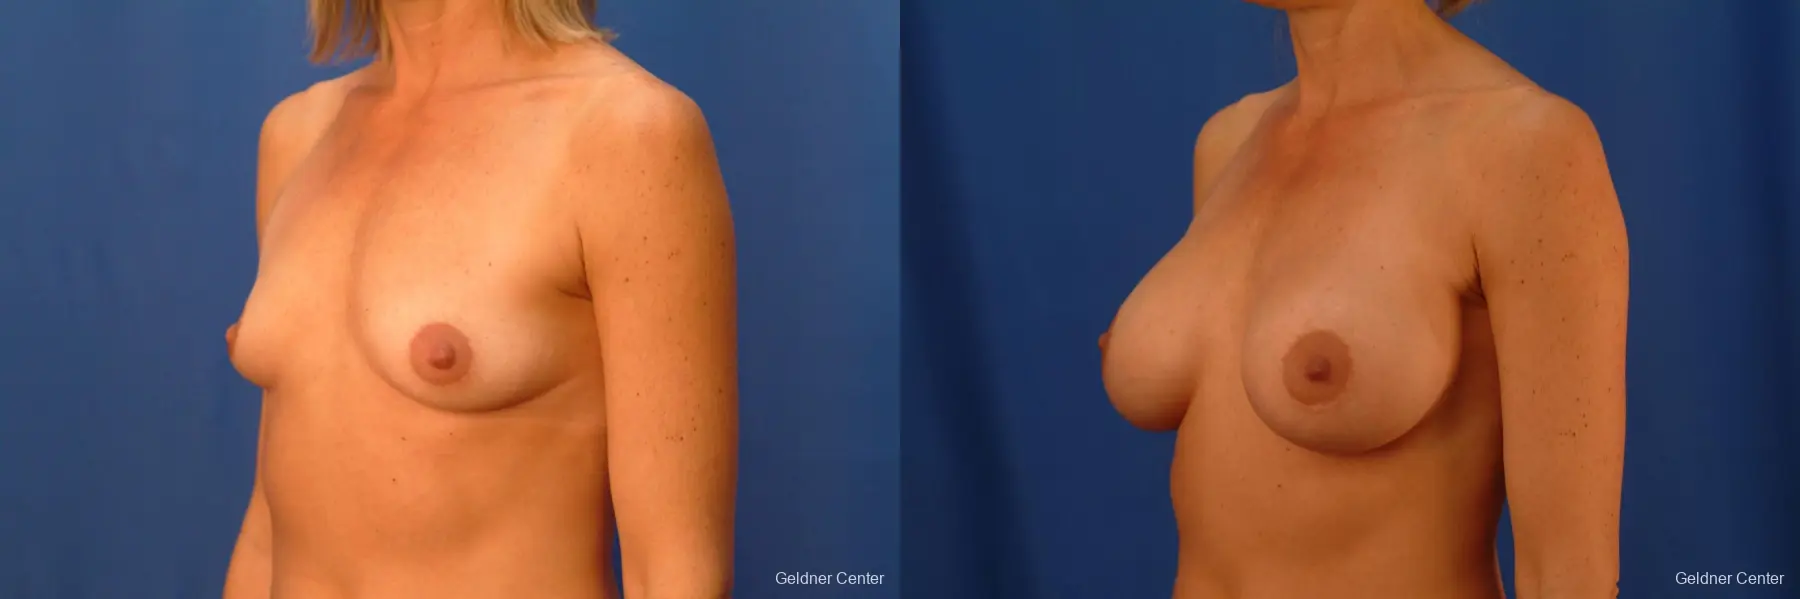 Breast Augmentation Lake Shore Dr, Chicago 2446 - Before and After 3